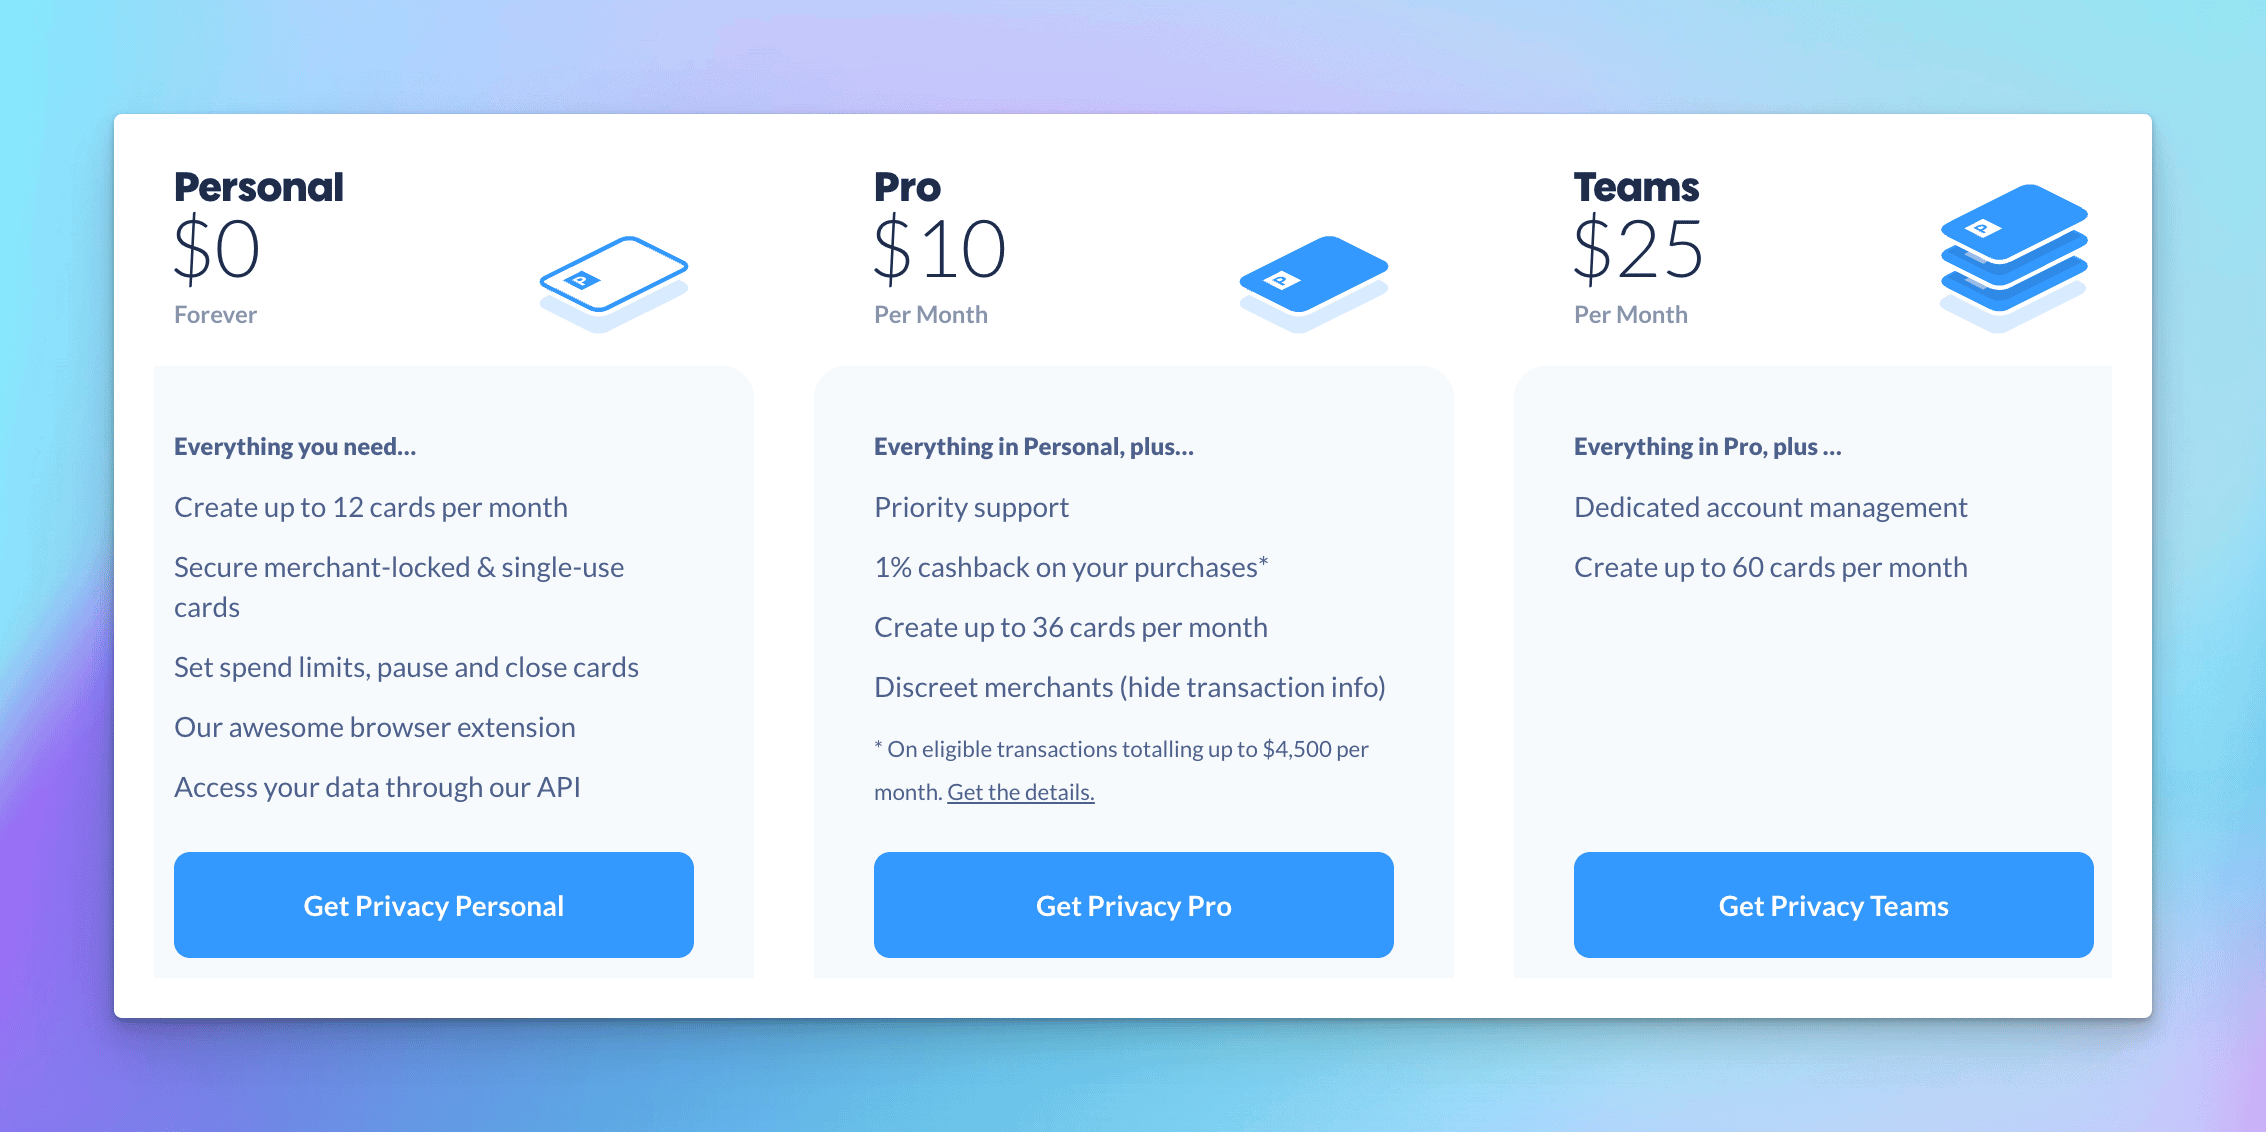 Privacy.com pricing models showing $0, $10, or $25 plans giving more cards, better support, and cash back features.